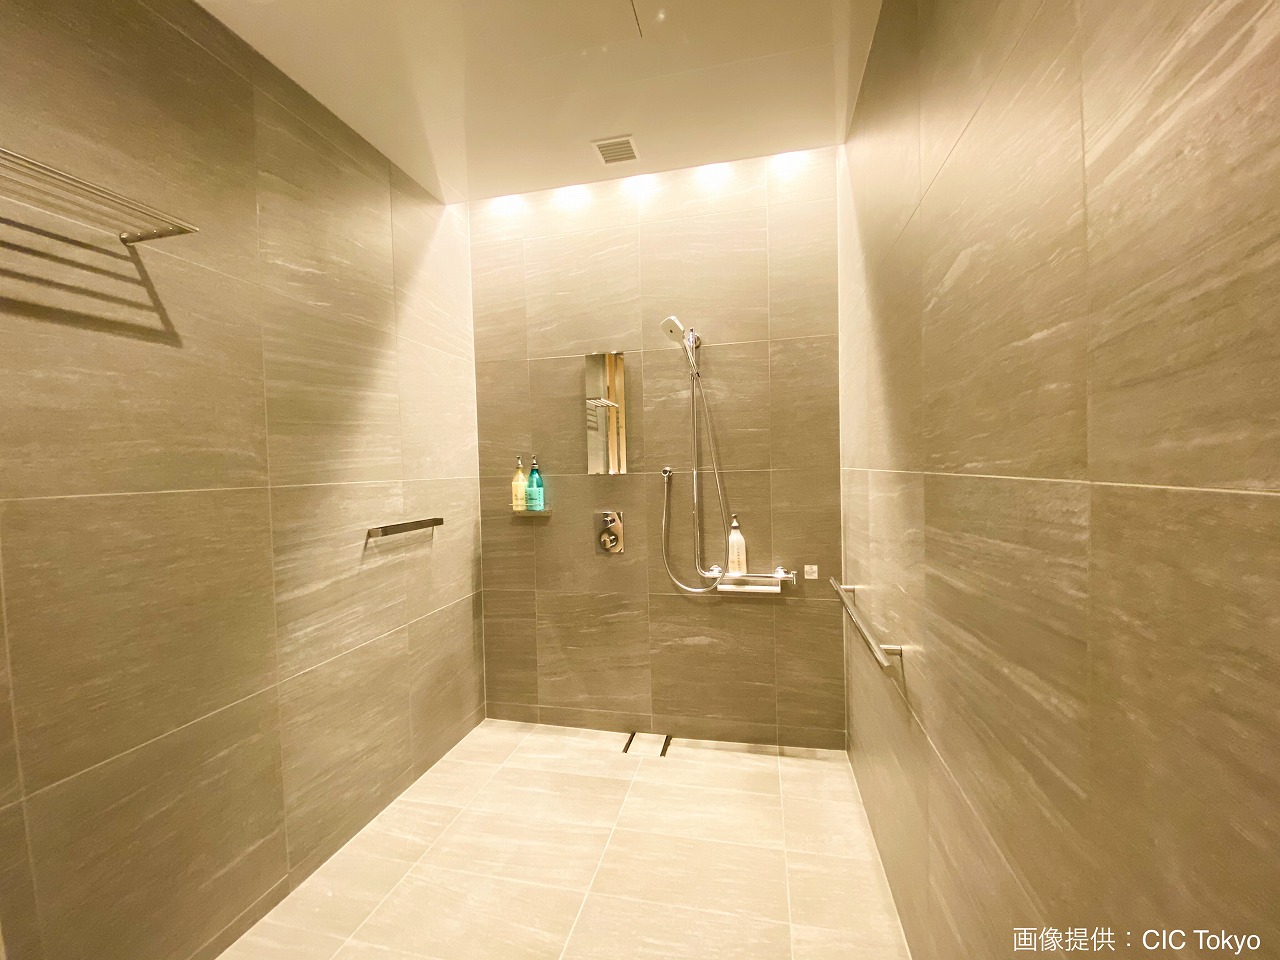 Facility: Shower. Luxury shower rooms with several kind of amenities are available.